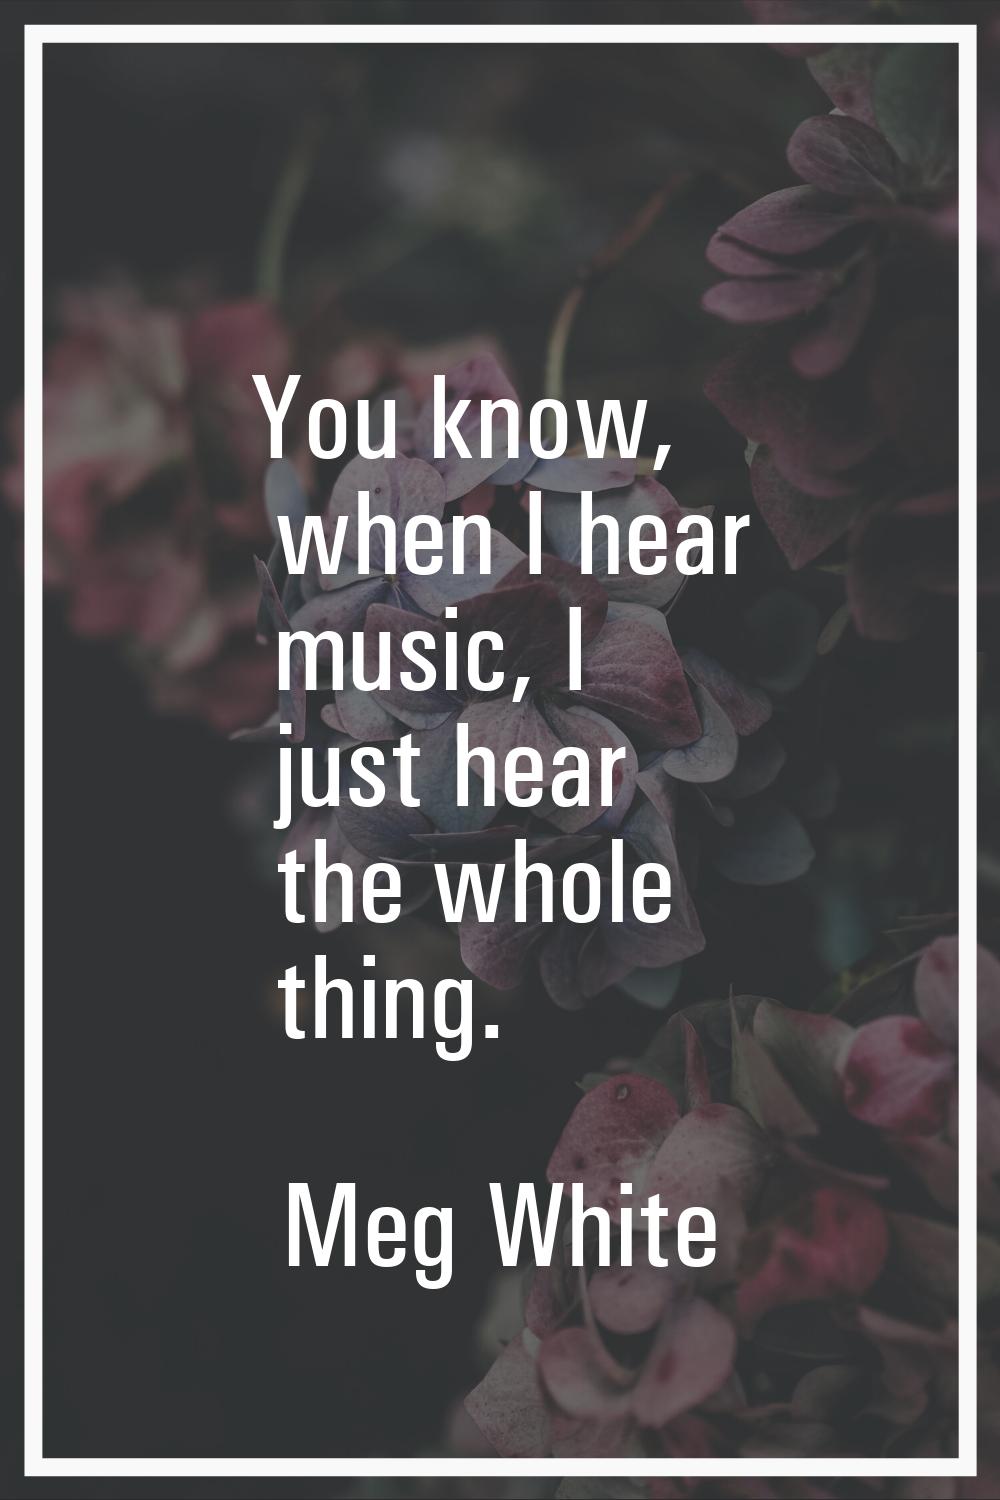 You know, when I hear music, I just hear the whole thing.